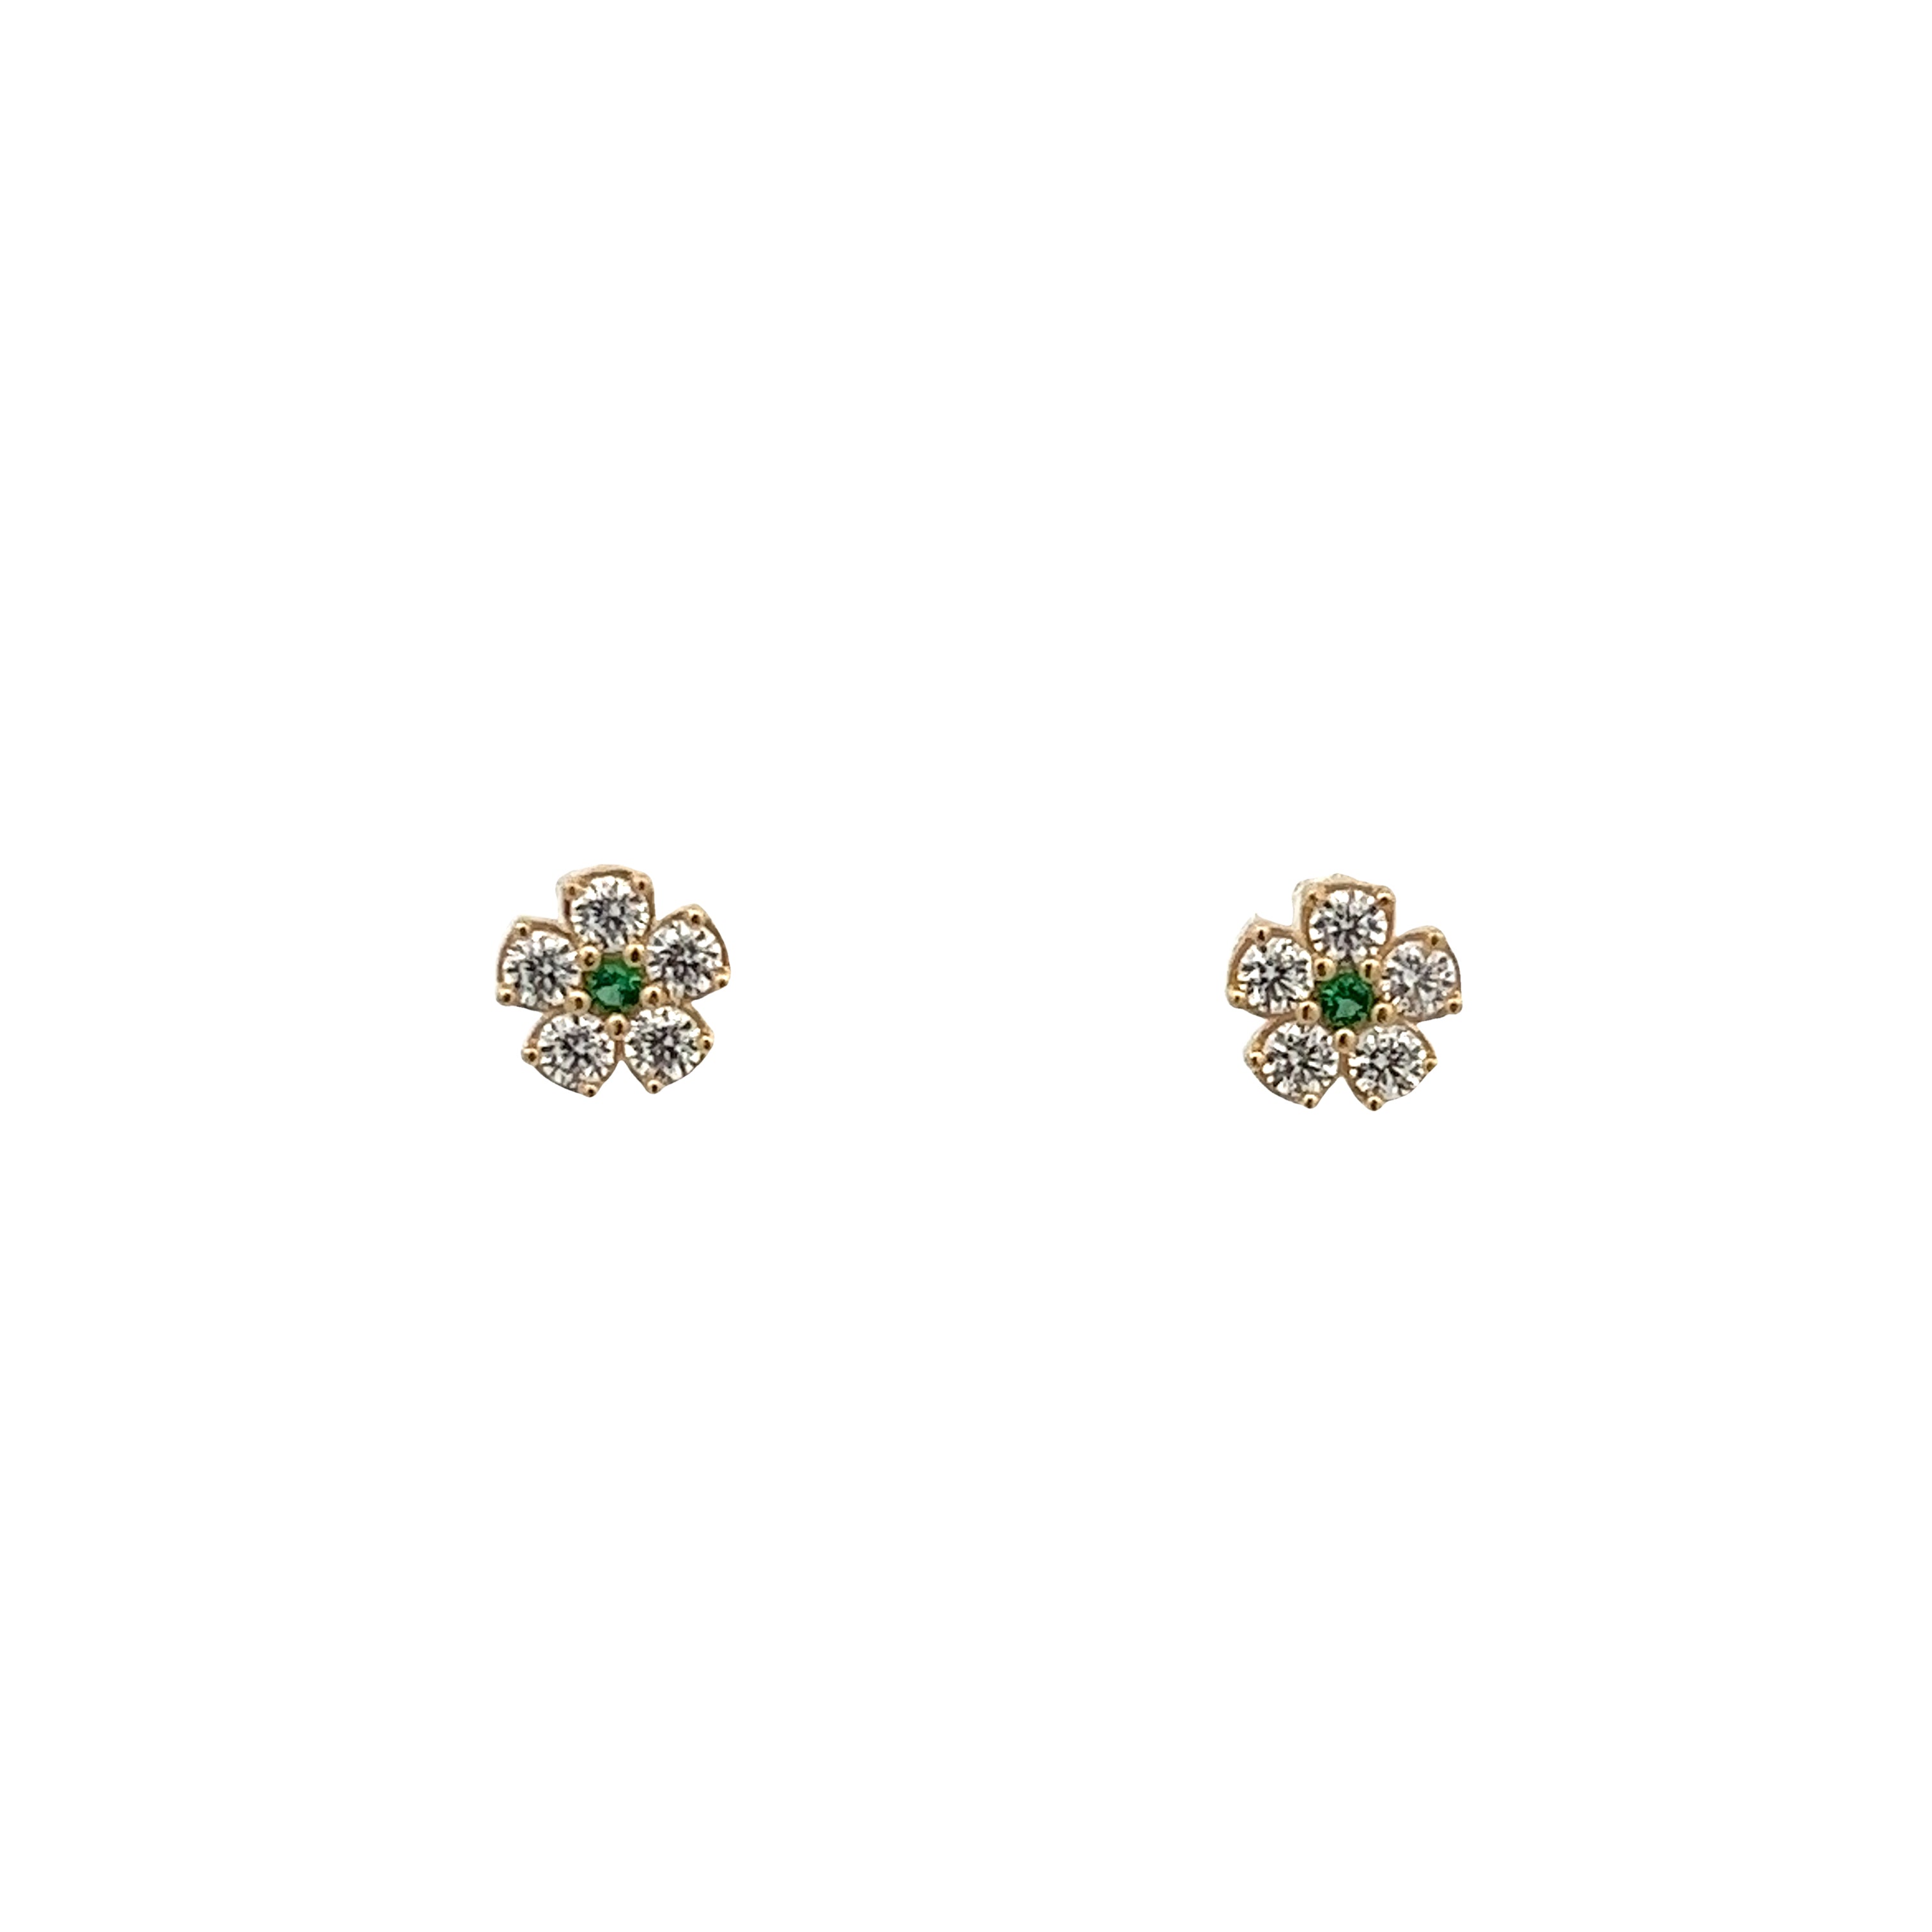 14K GOLD FLOWER WITH GREEN CRYSTALS EARRINGS